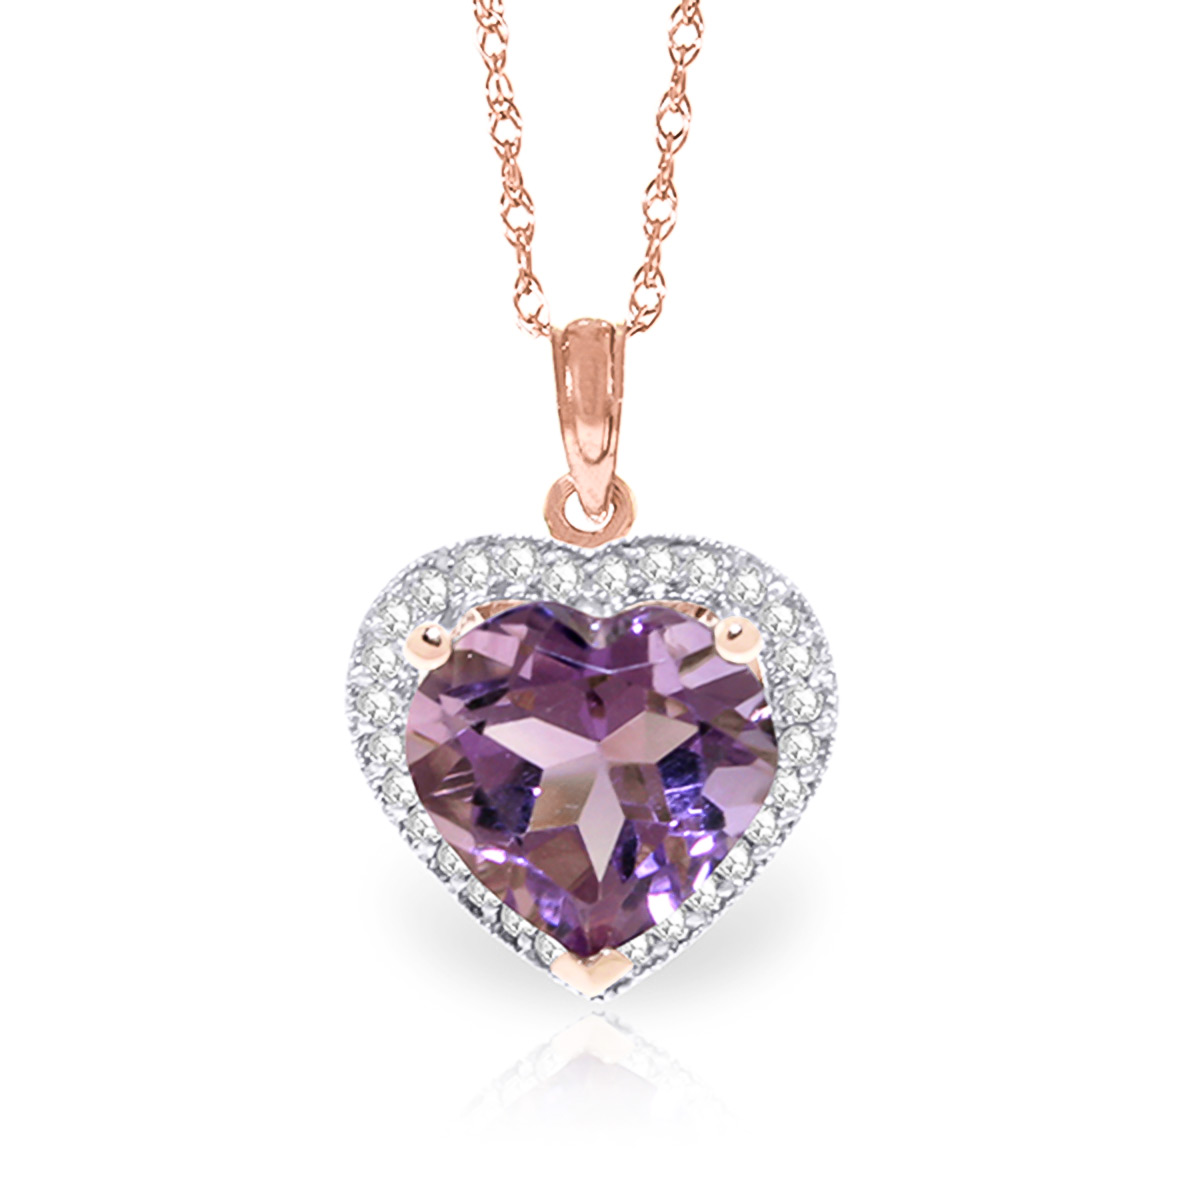 Amethyst Halo Pendant Necklace 3.24 ctw in 9ct Rose Gold